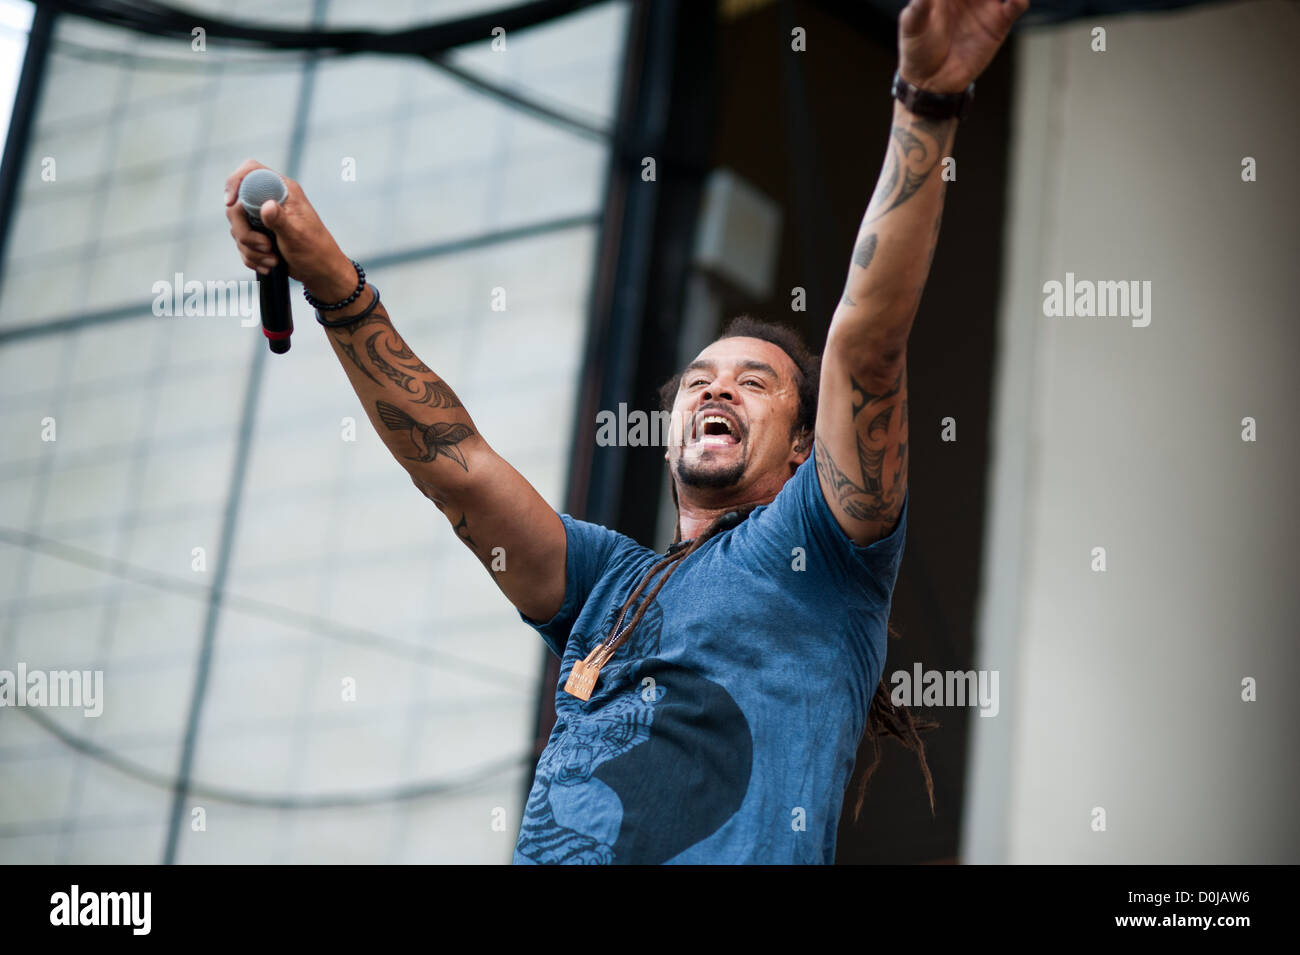 Michael Franti & Spearhead performing at the Taste of Chicago, July 13, 2012. MAX HERMAN/ALAMY Stock Photo